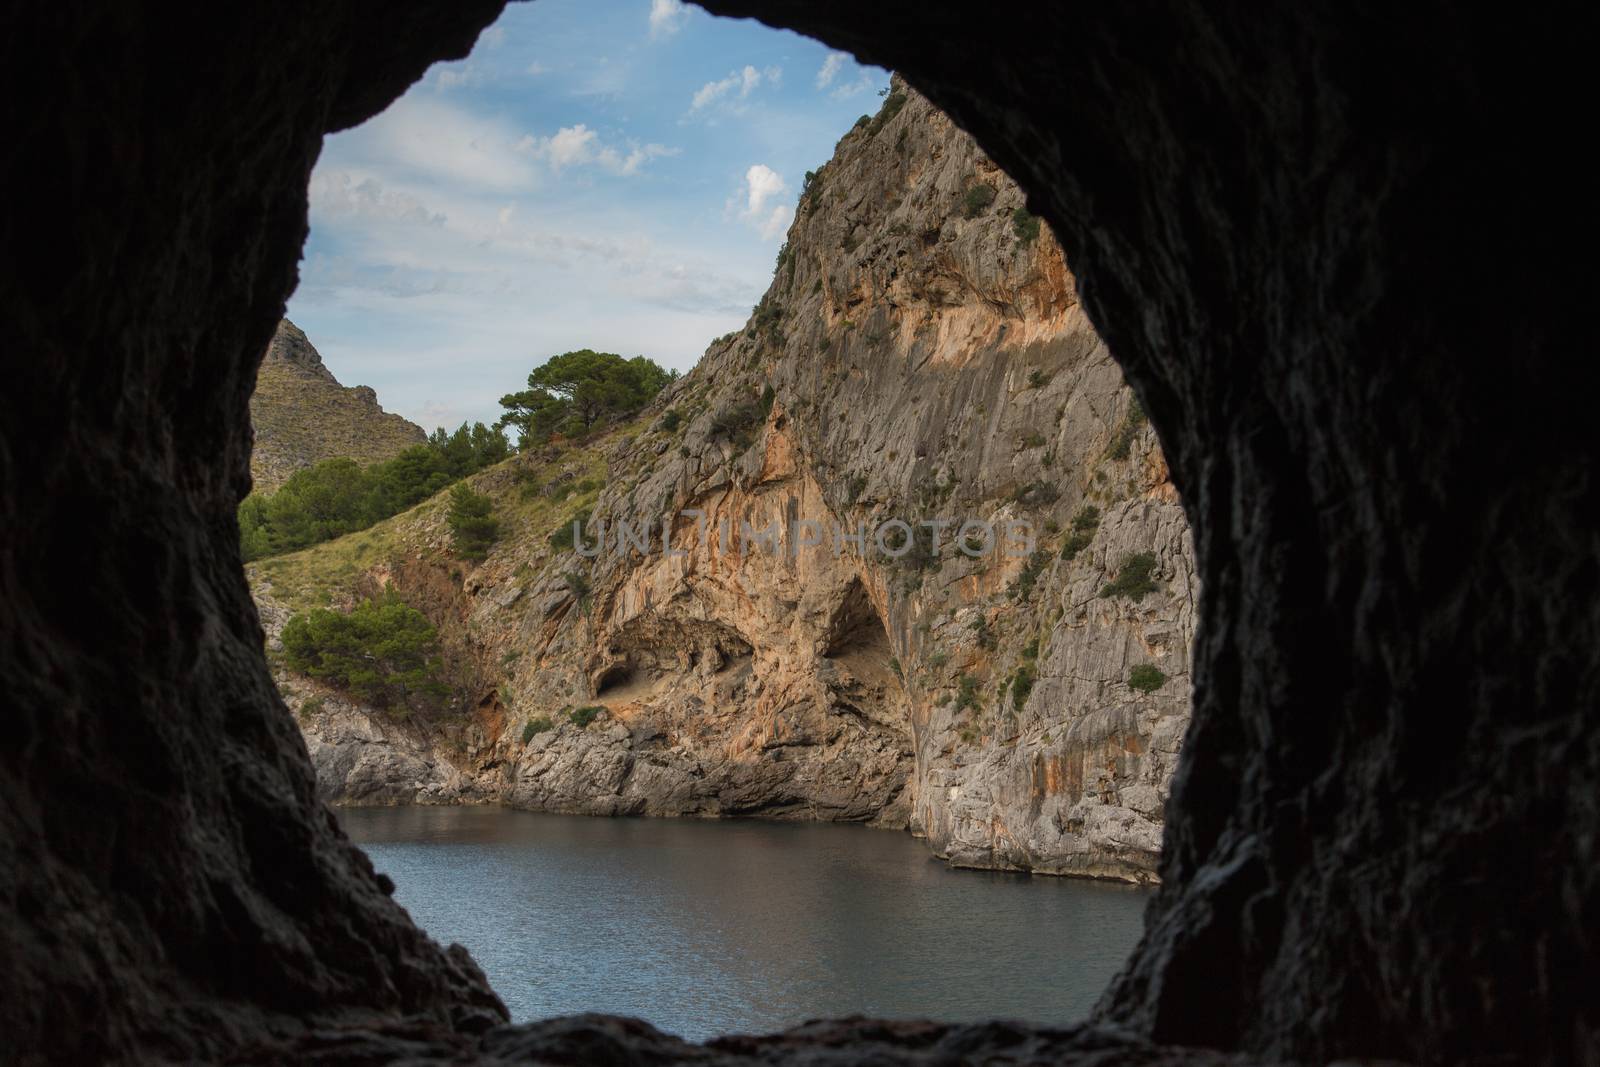 View of the bay through a hole in the cave